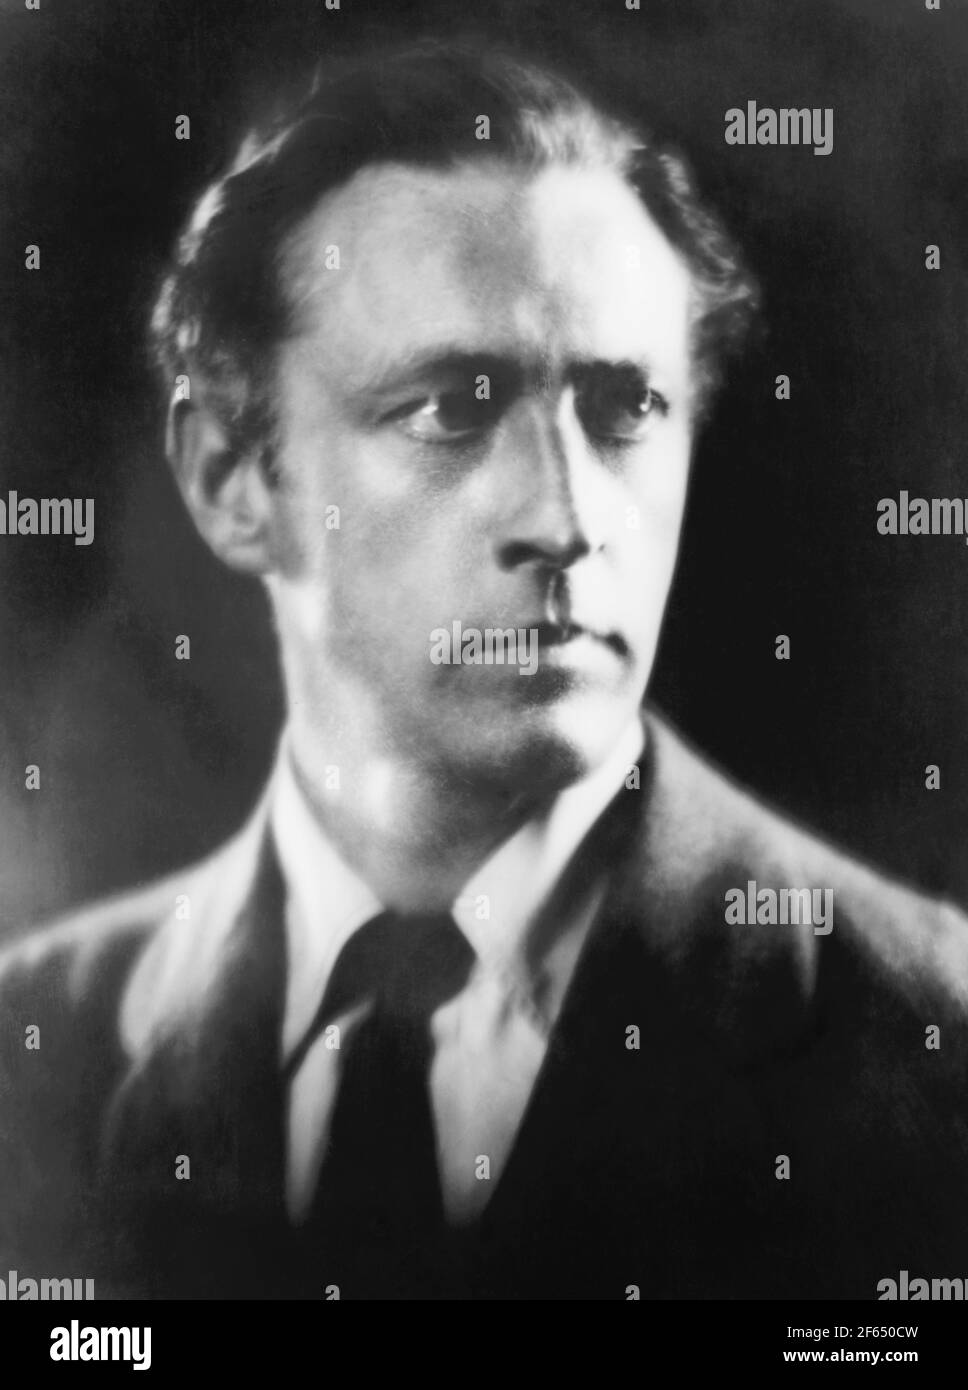 Vintage portrait photo of American actor John Barrymore (1882 – 1942). Photo by Arnold Genthe circa 1922. Stock Photo